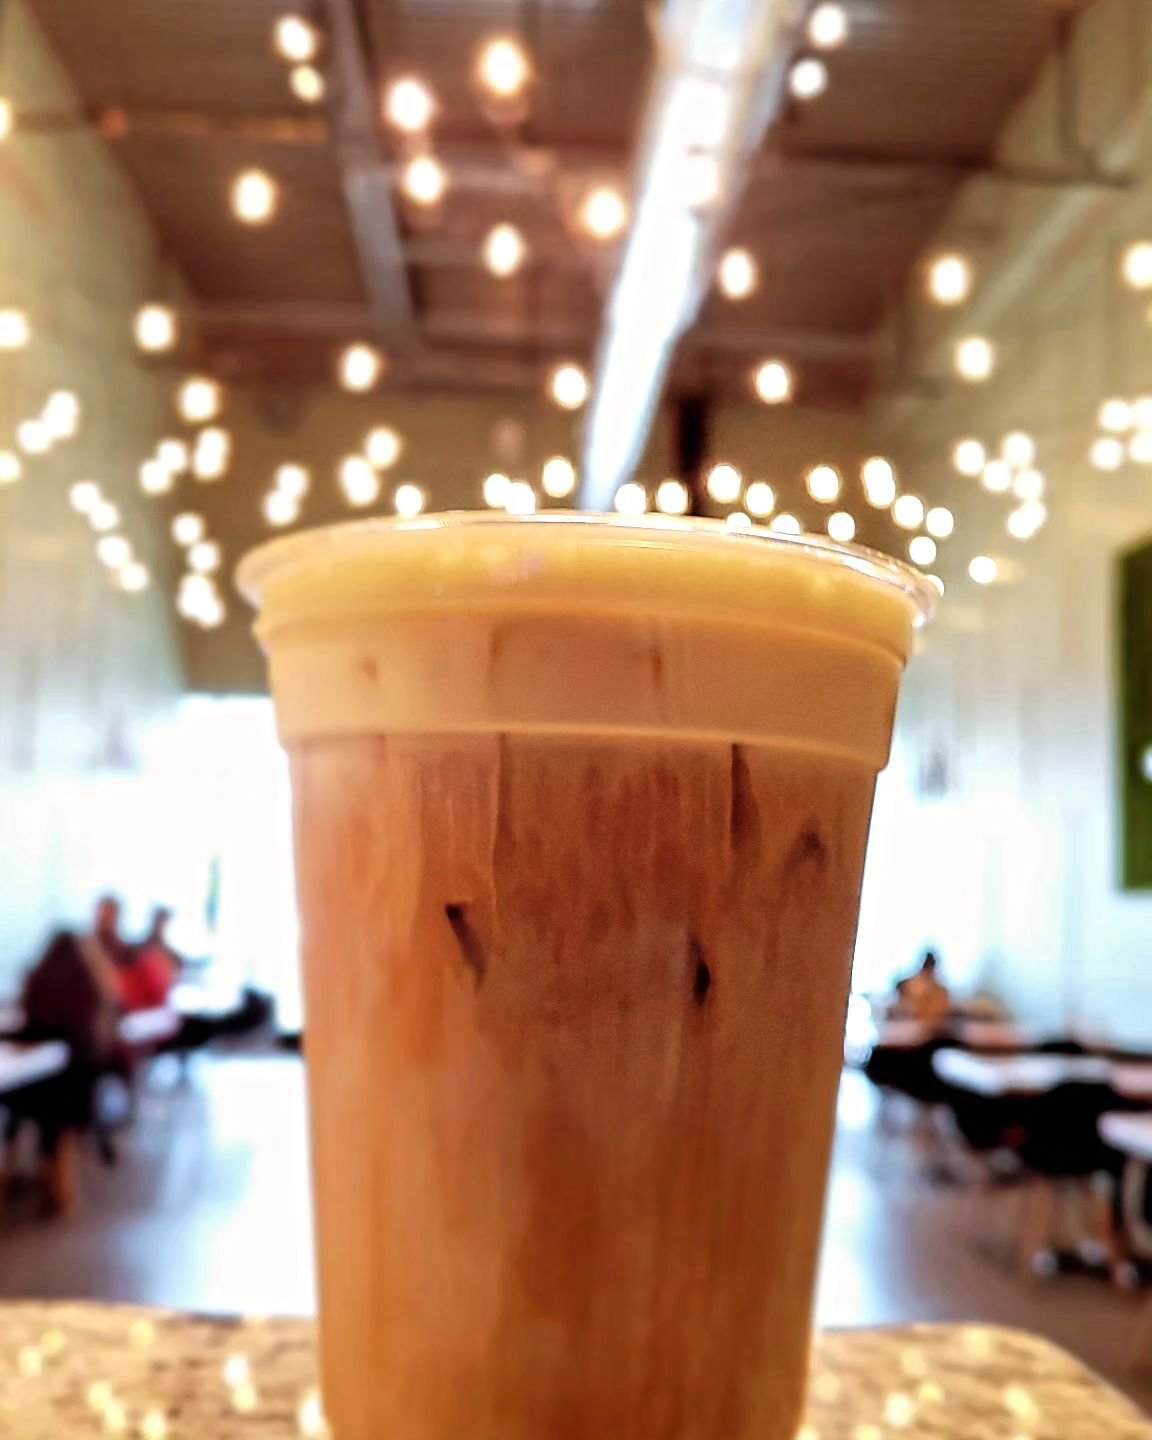 Coconut Cloud Cold Brew

When It starts to get warm outside but you need your caffeine fix, we have you covered. Come in and try our seasonal menu items including this beauty. Our cold brew with sweetend condensed milk, house made coconut syrup, topp